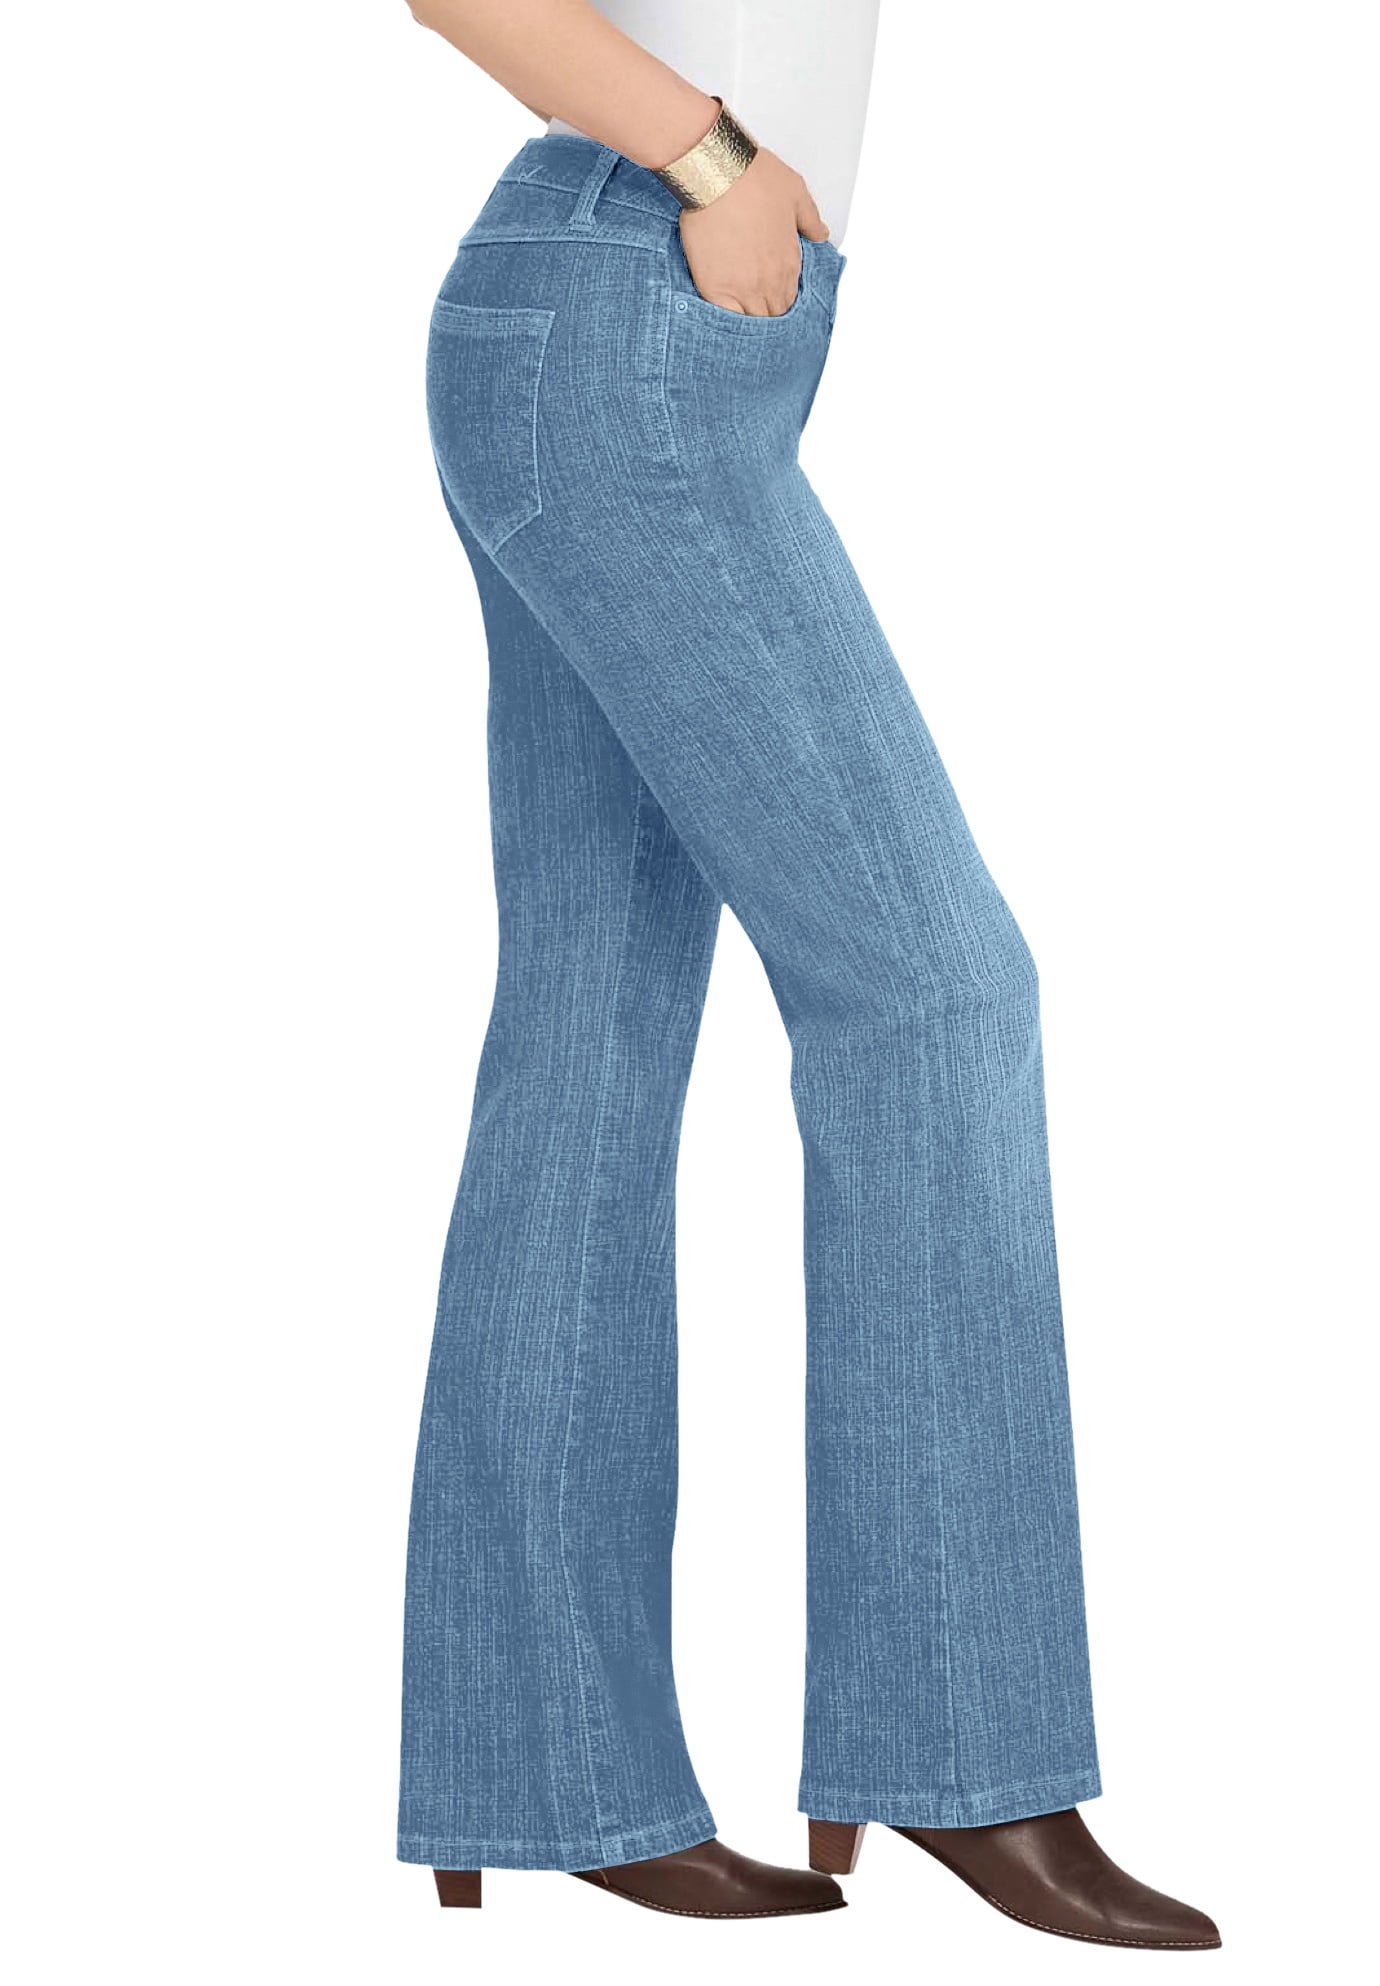 Roamans Women's Plus Size Tall Bootcut Pull-On Stretch Jean